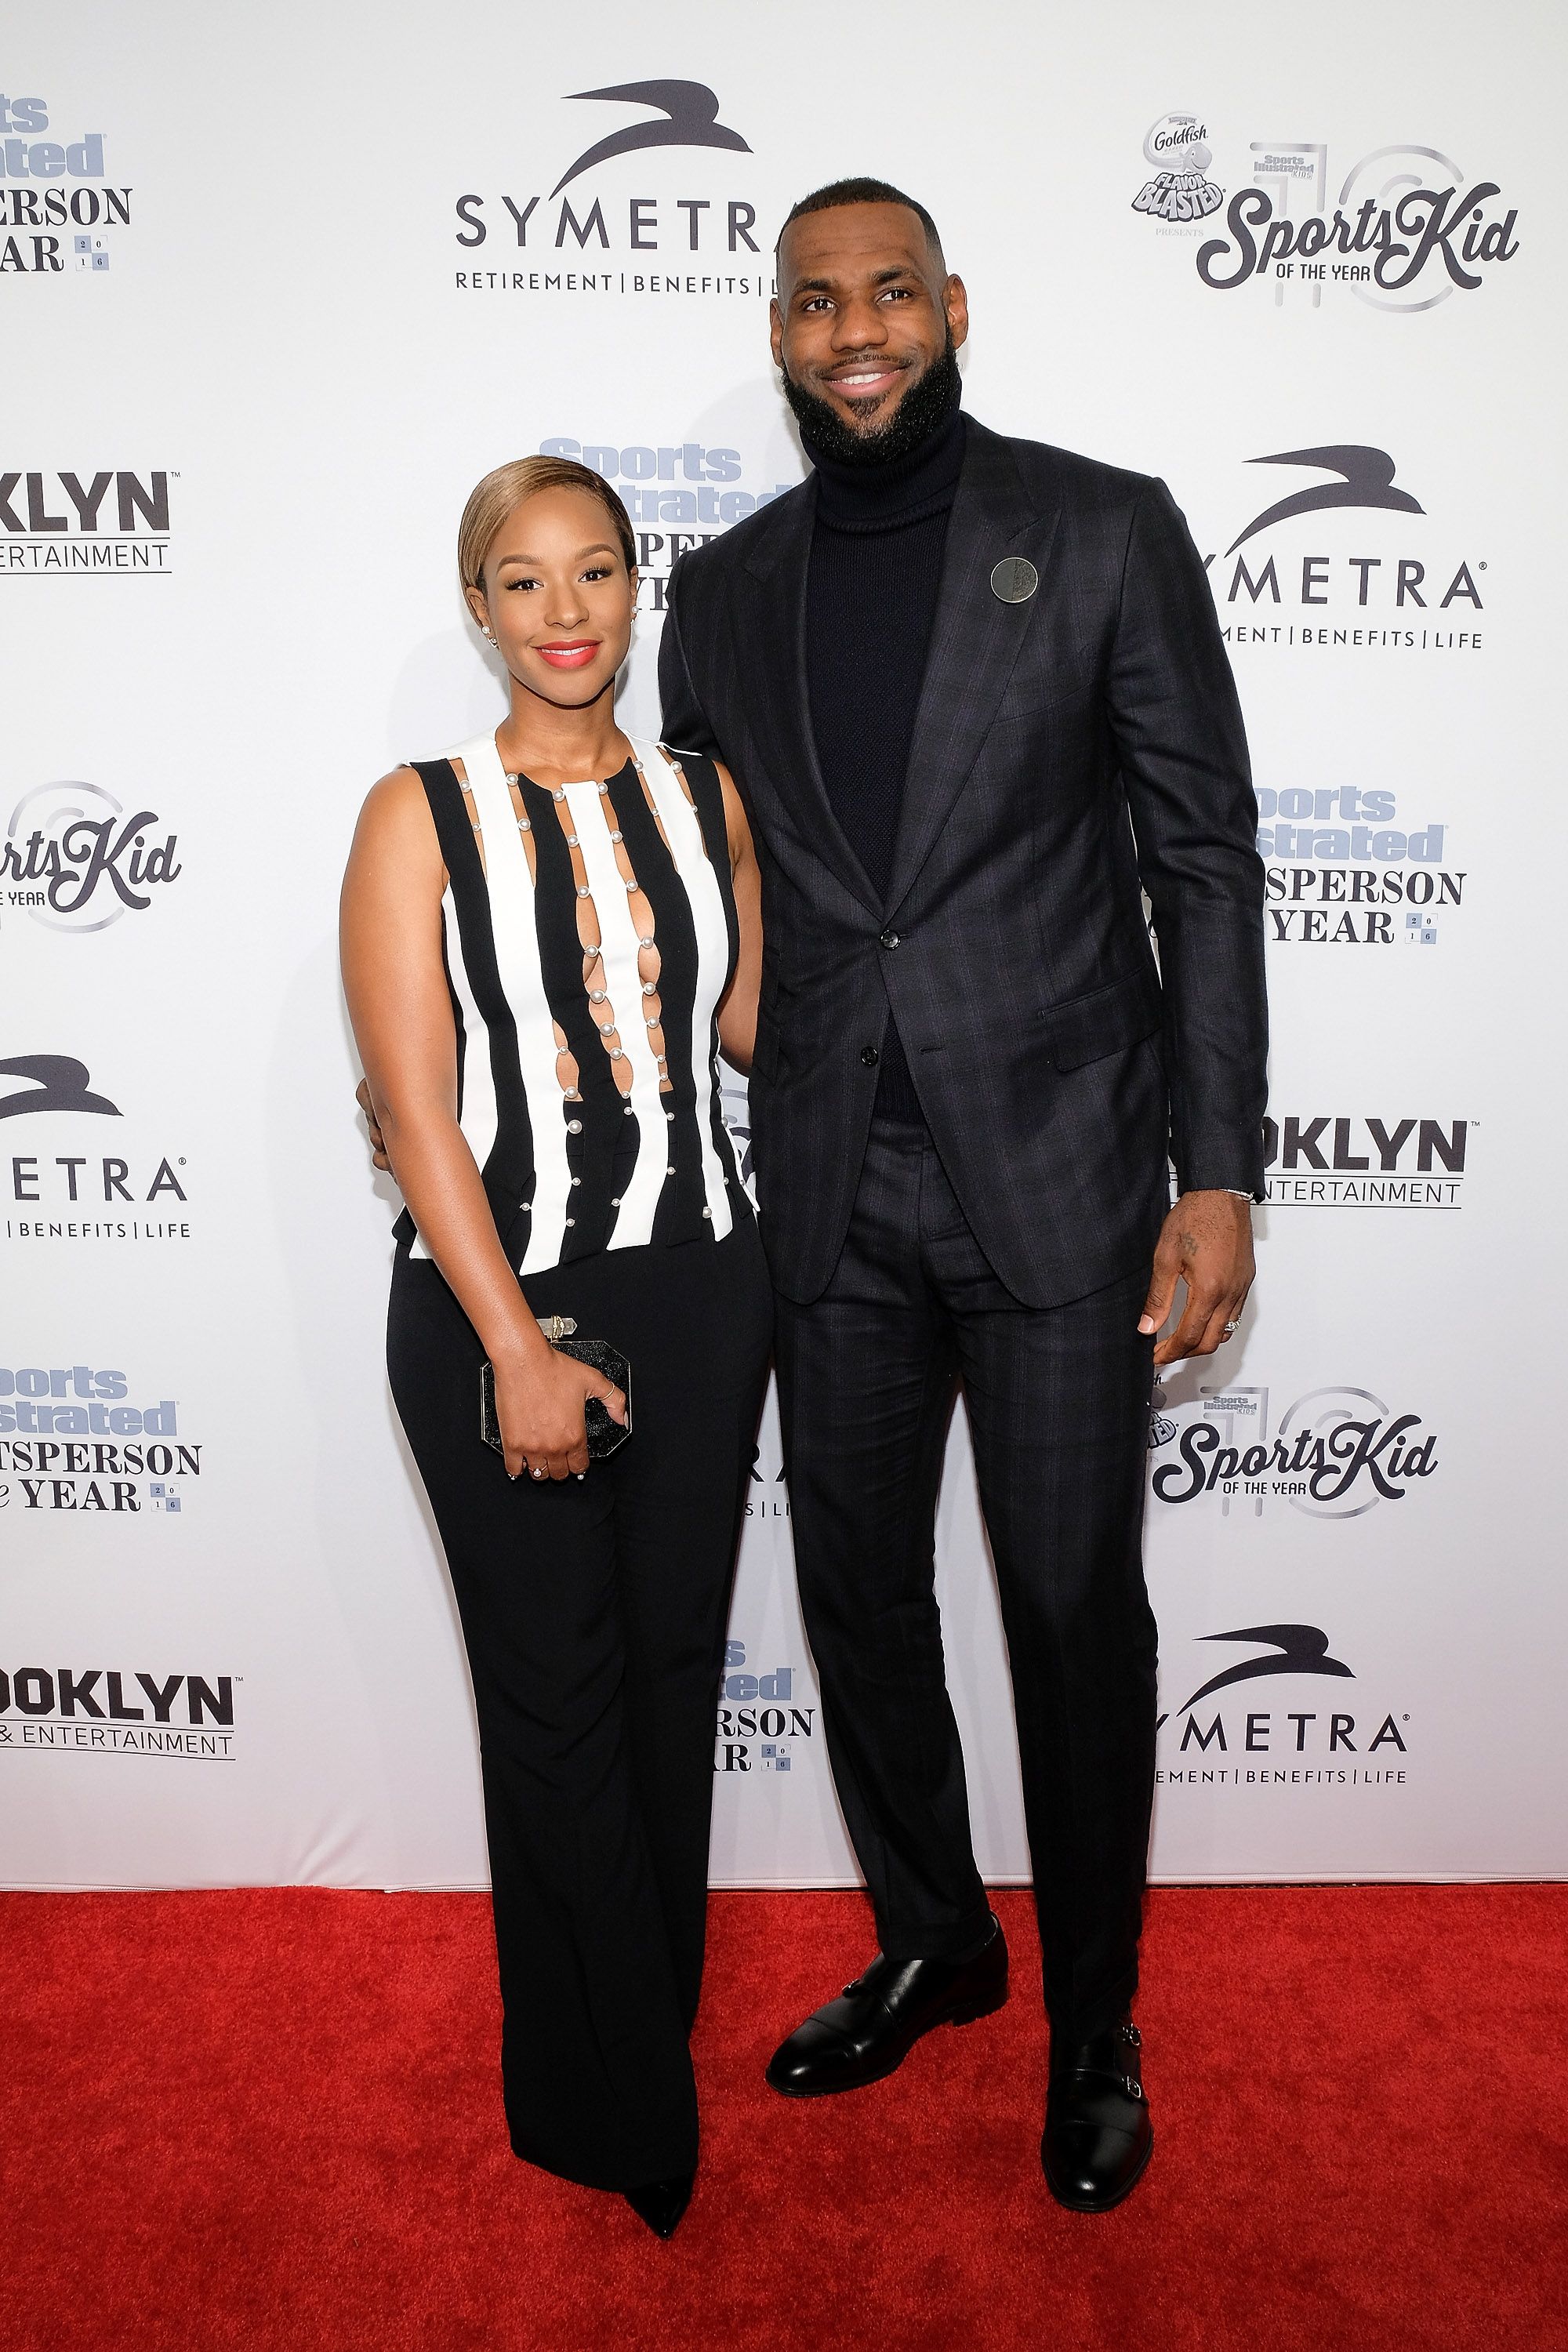 See These 11 Celebrity Couples With Crazy Height Differences